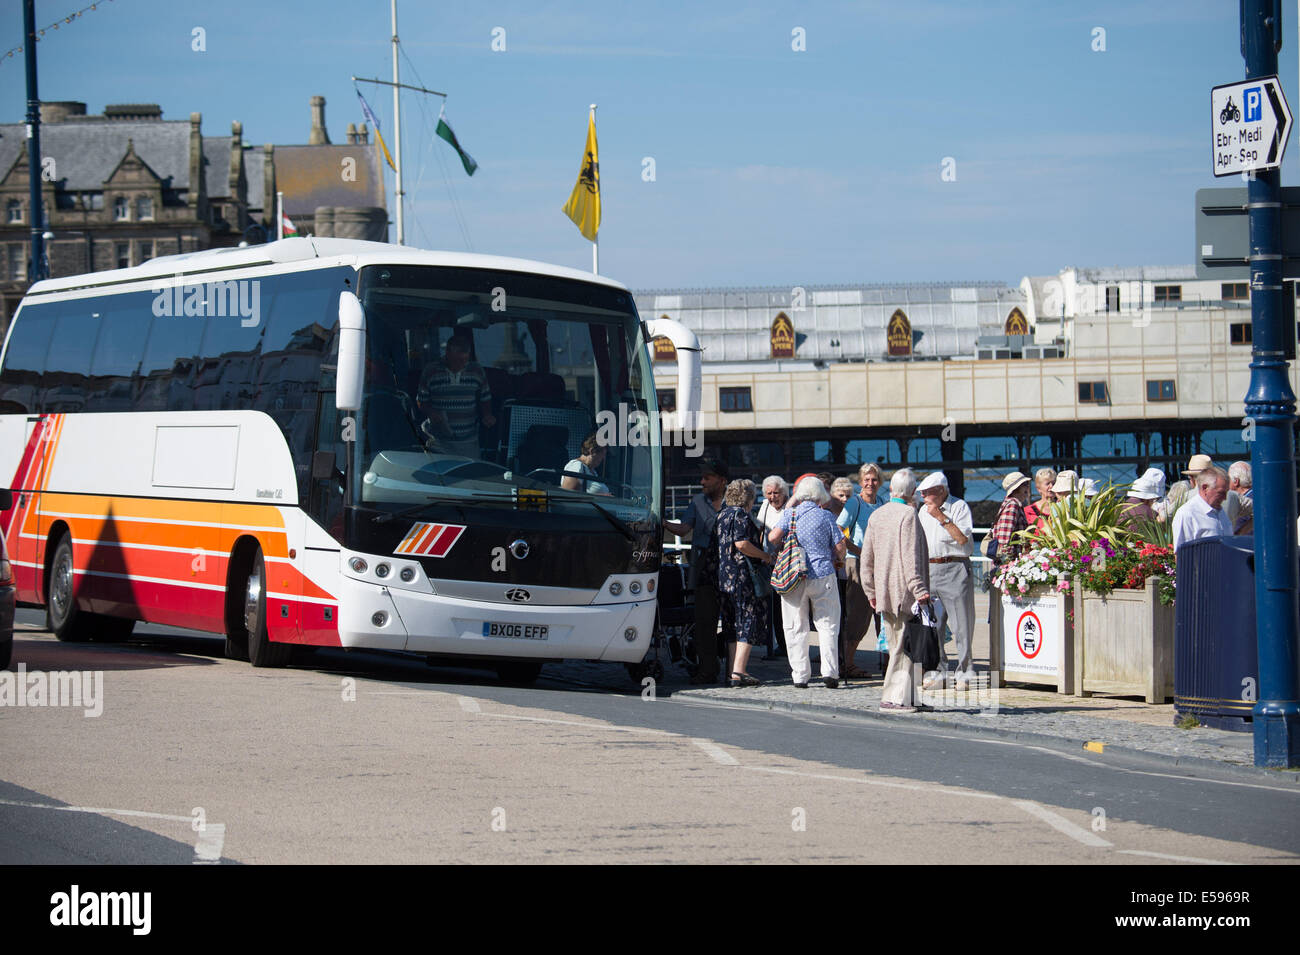 Aberystwyth, Wales, UK. 24th July, 2014.  A group of senior people emerge from their tour coach on a hot sunny morning at  Aberystwyth on the west Wales coast UK.  The heatwave is expected to last at least  another day, with project temperatures almost reaching 30c in some inland places, before cooler weather returns at the weekend  photo Credit:  keith morris/Alamy Live News Stock Photo